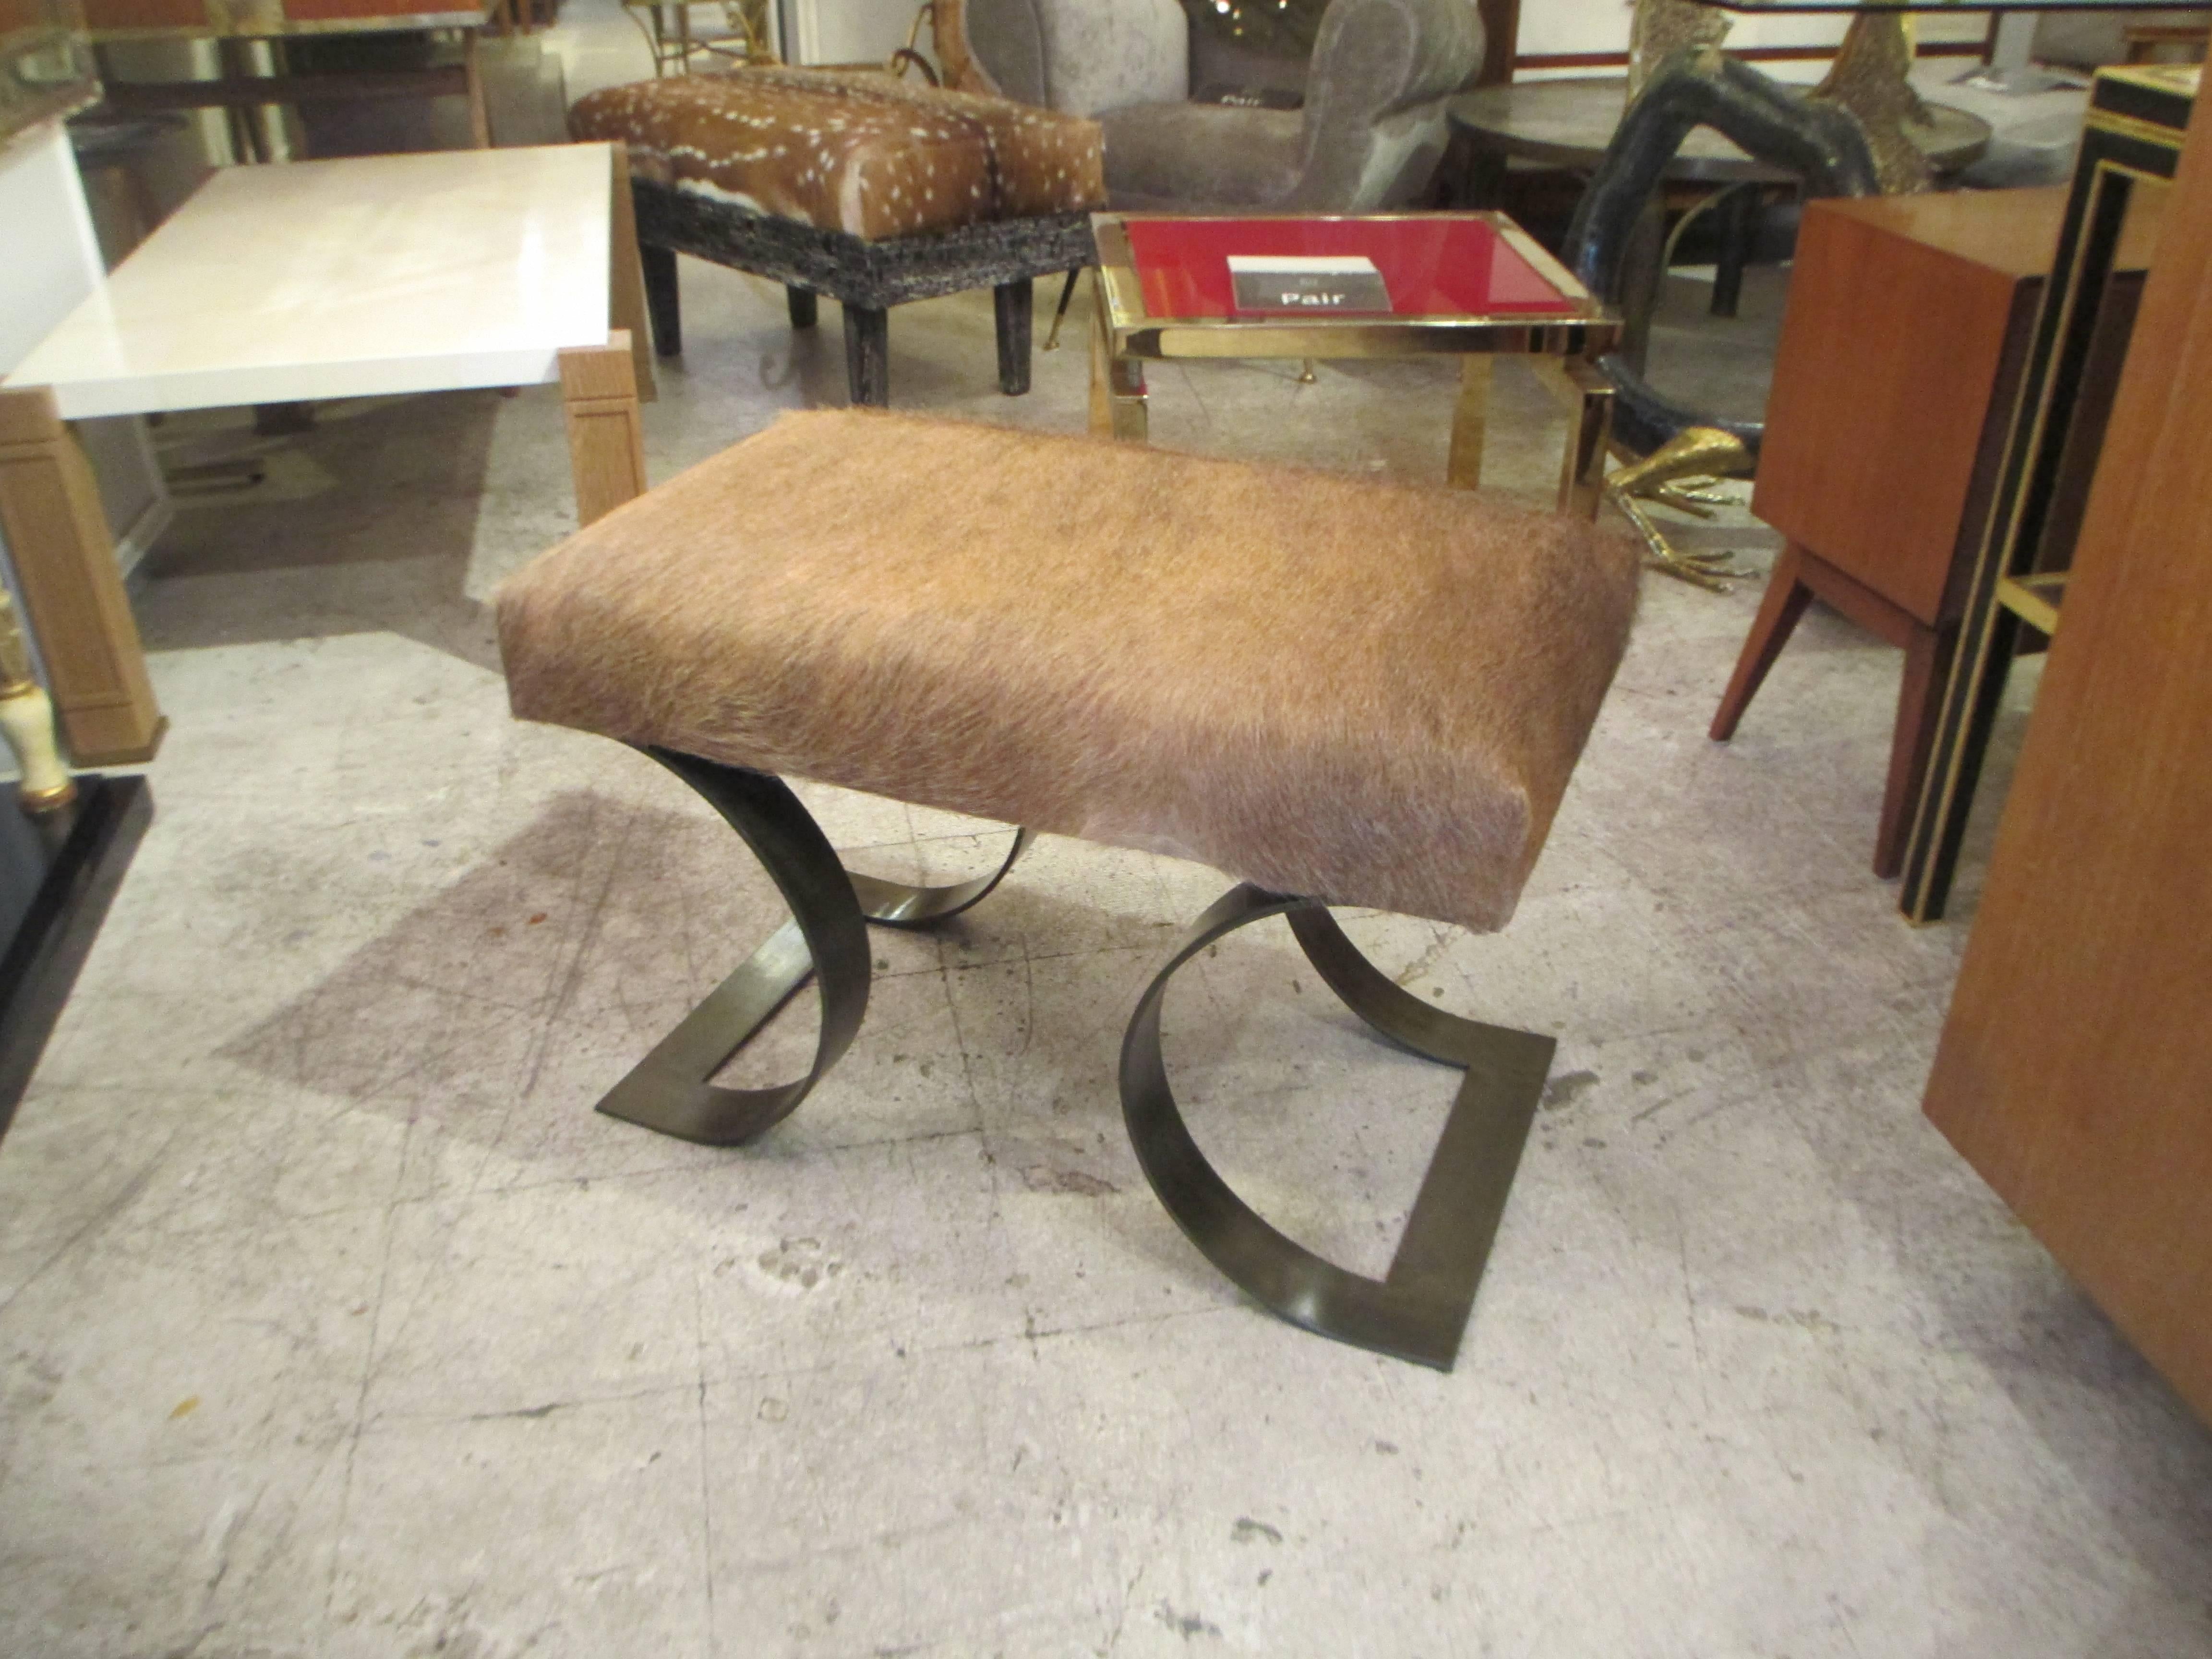 A pair of sculptural Mid-Century Modern benches upholstered in cattle hide on a polished iron base.